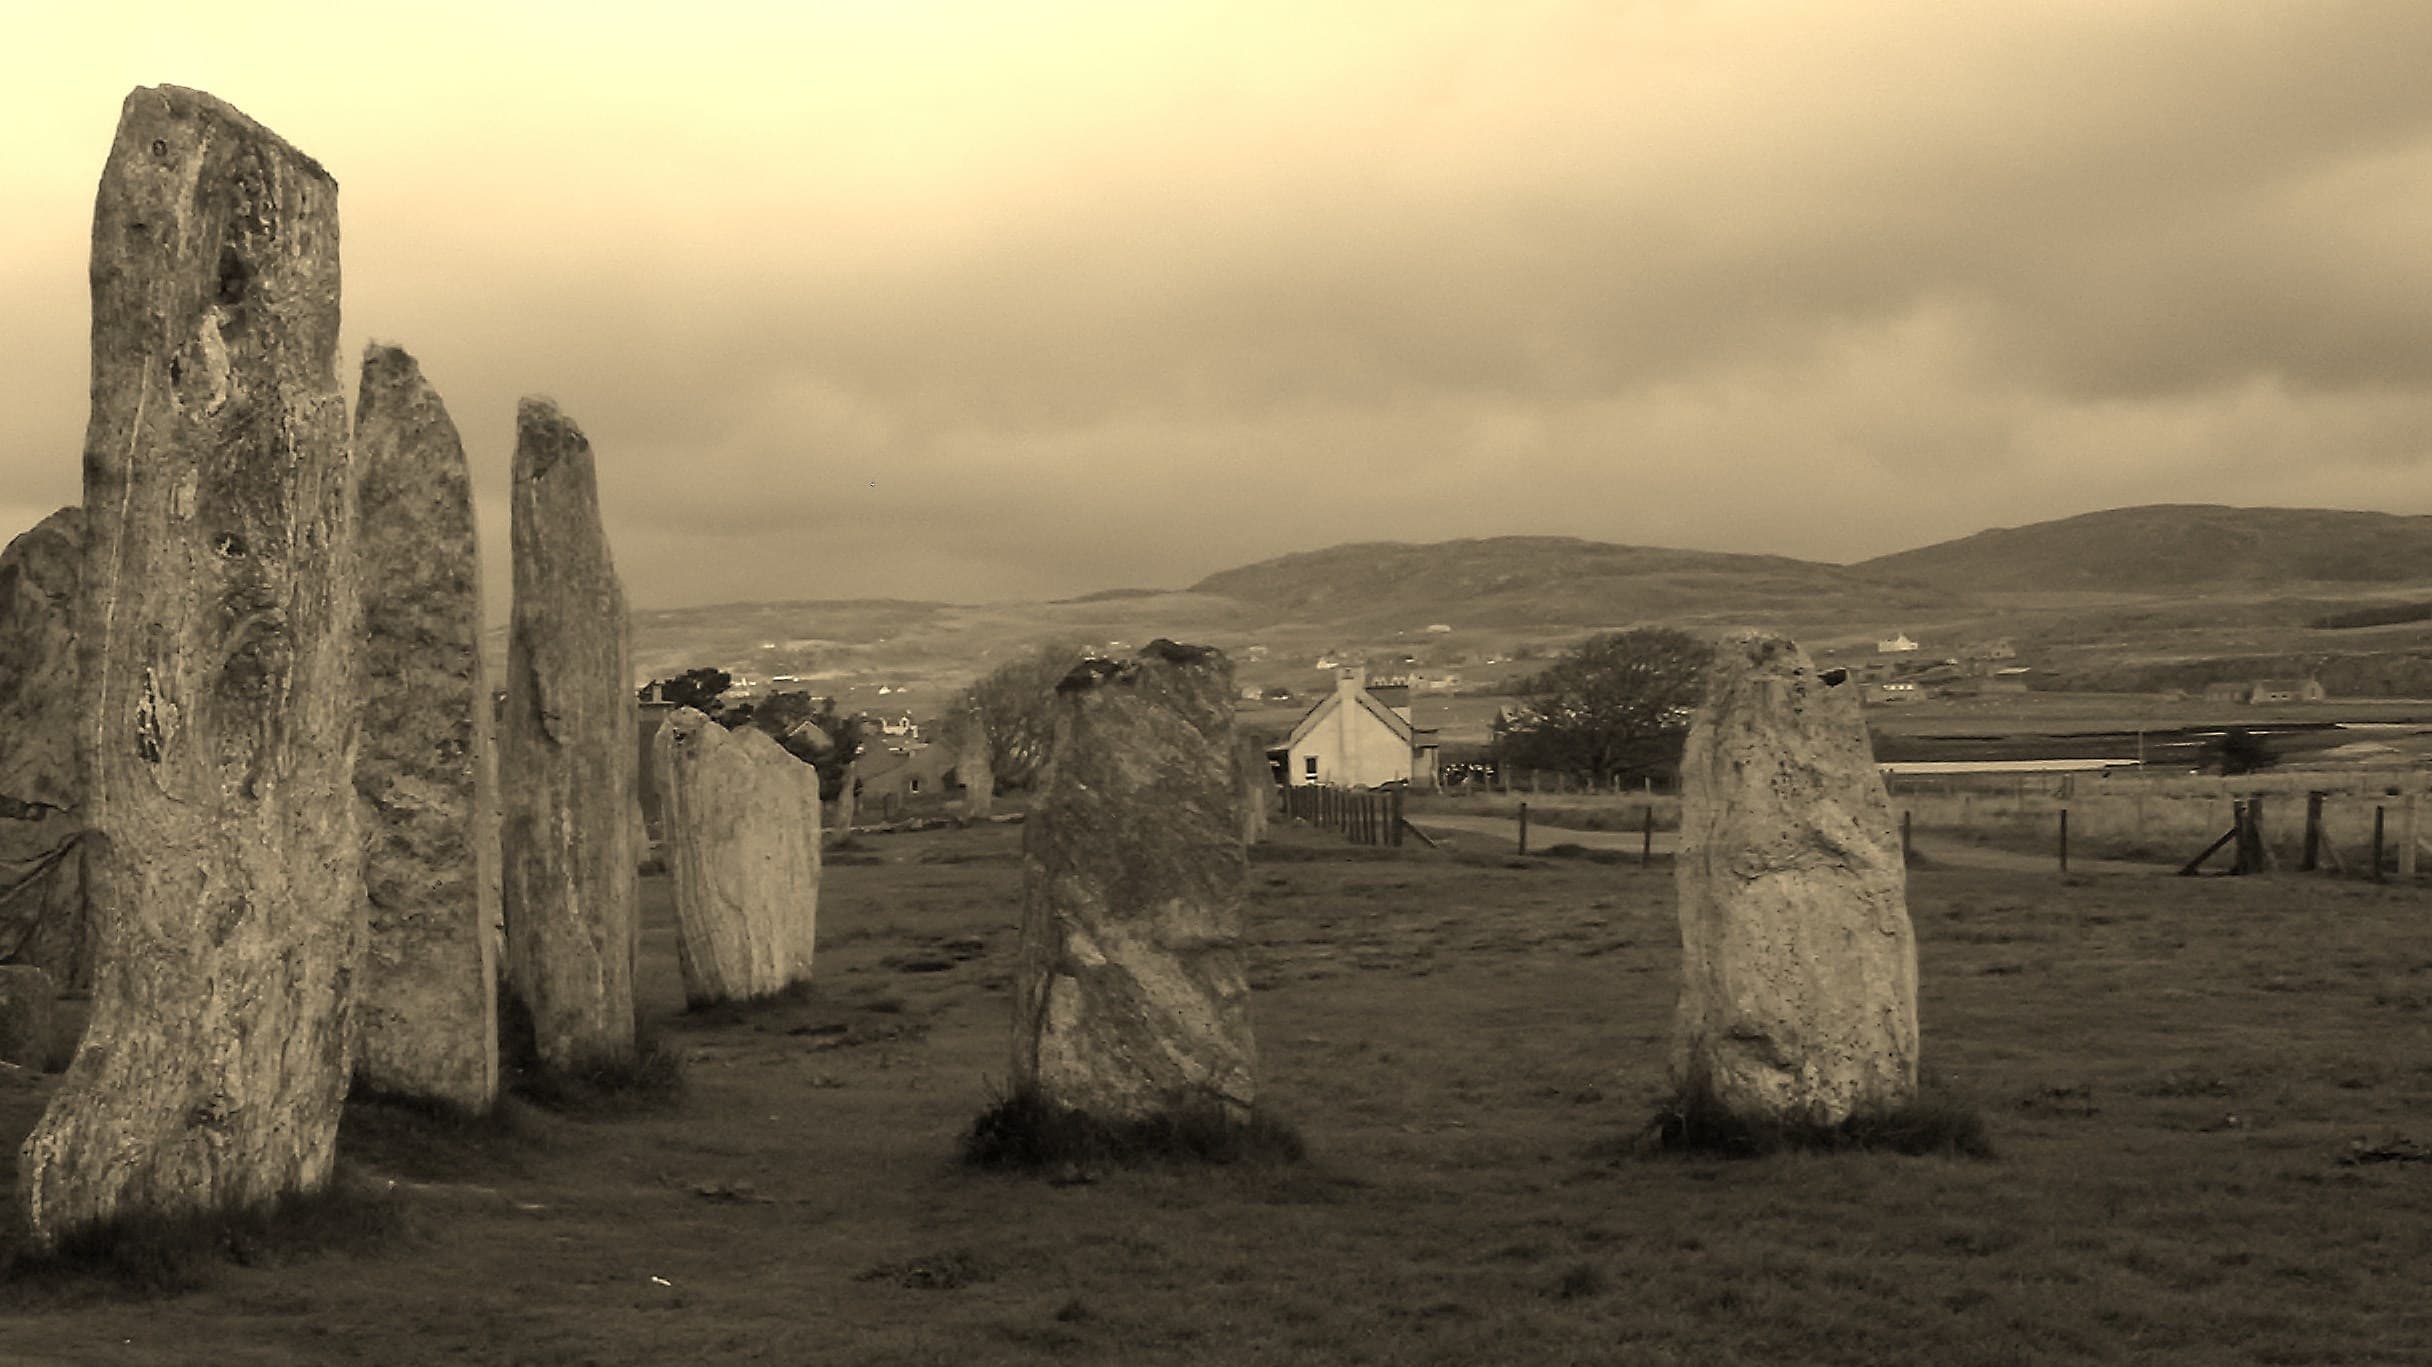 Callanish Stone Circle on the Isle of Lewis in the Outer Hebrides